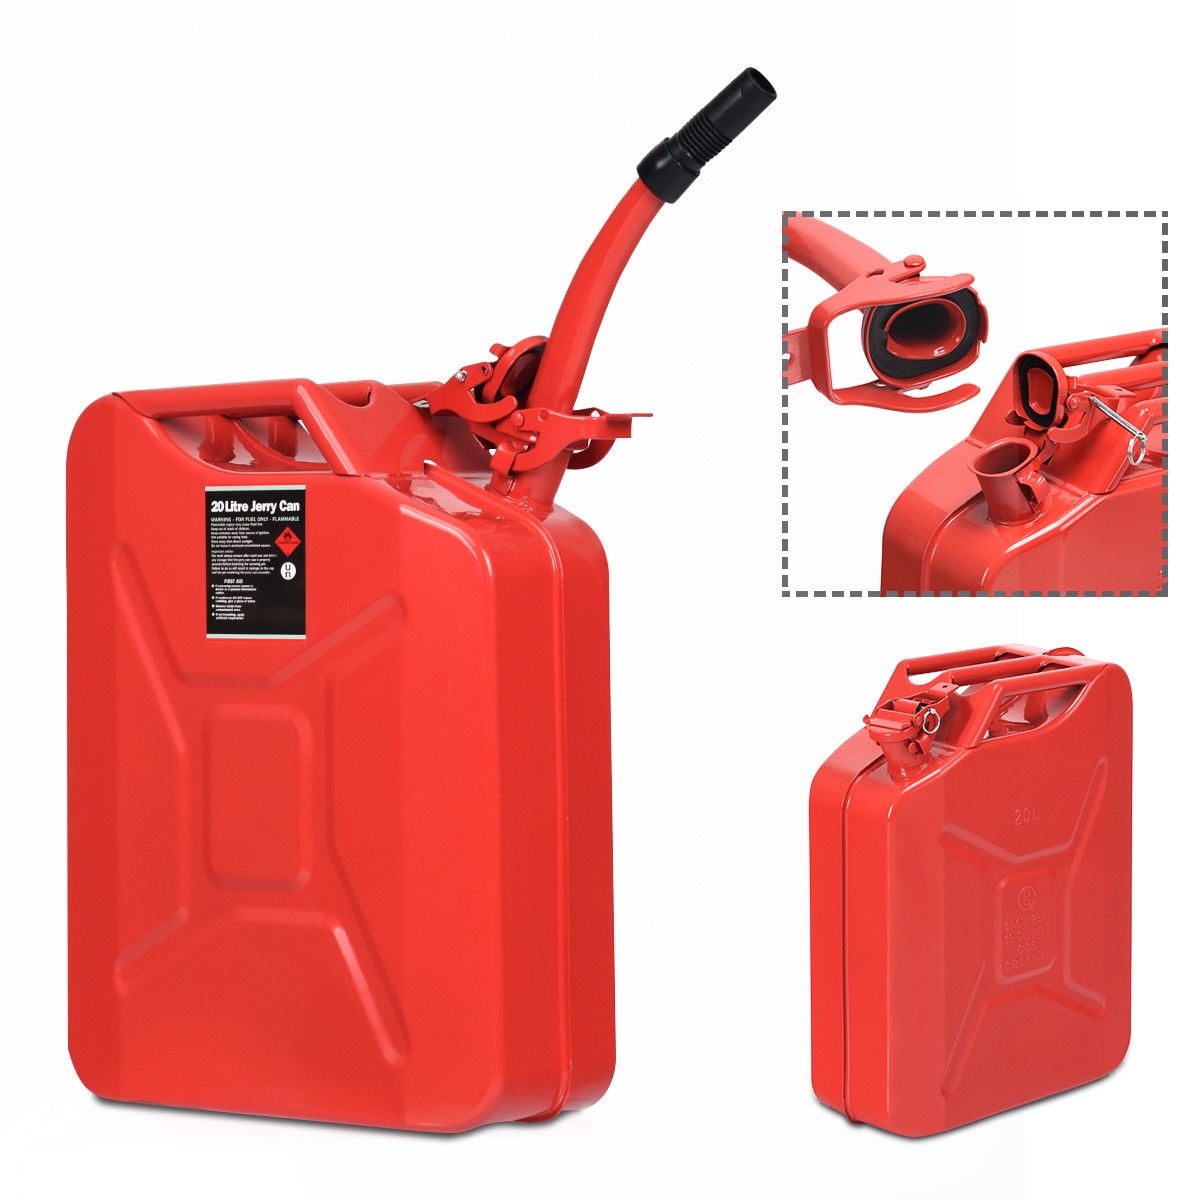 5 Gallon Jerry Can Gas Fuel Steel Tank RED Military Style 20L Can w/ Green Spout 